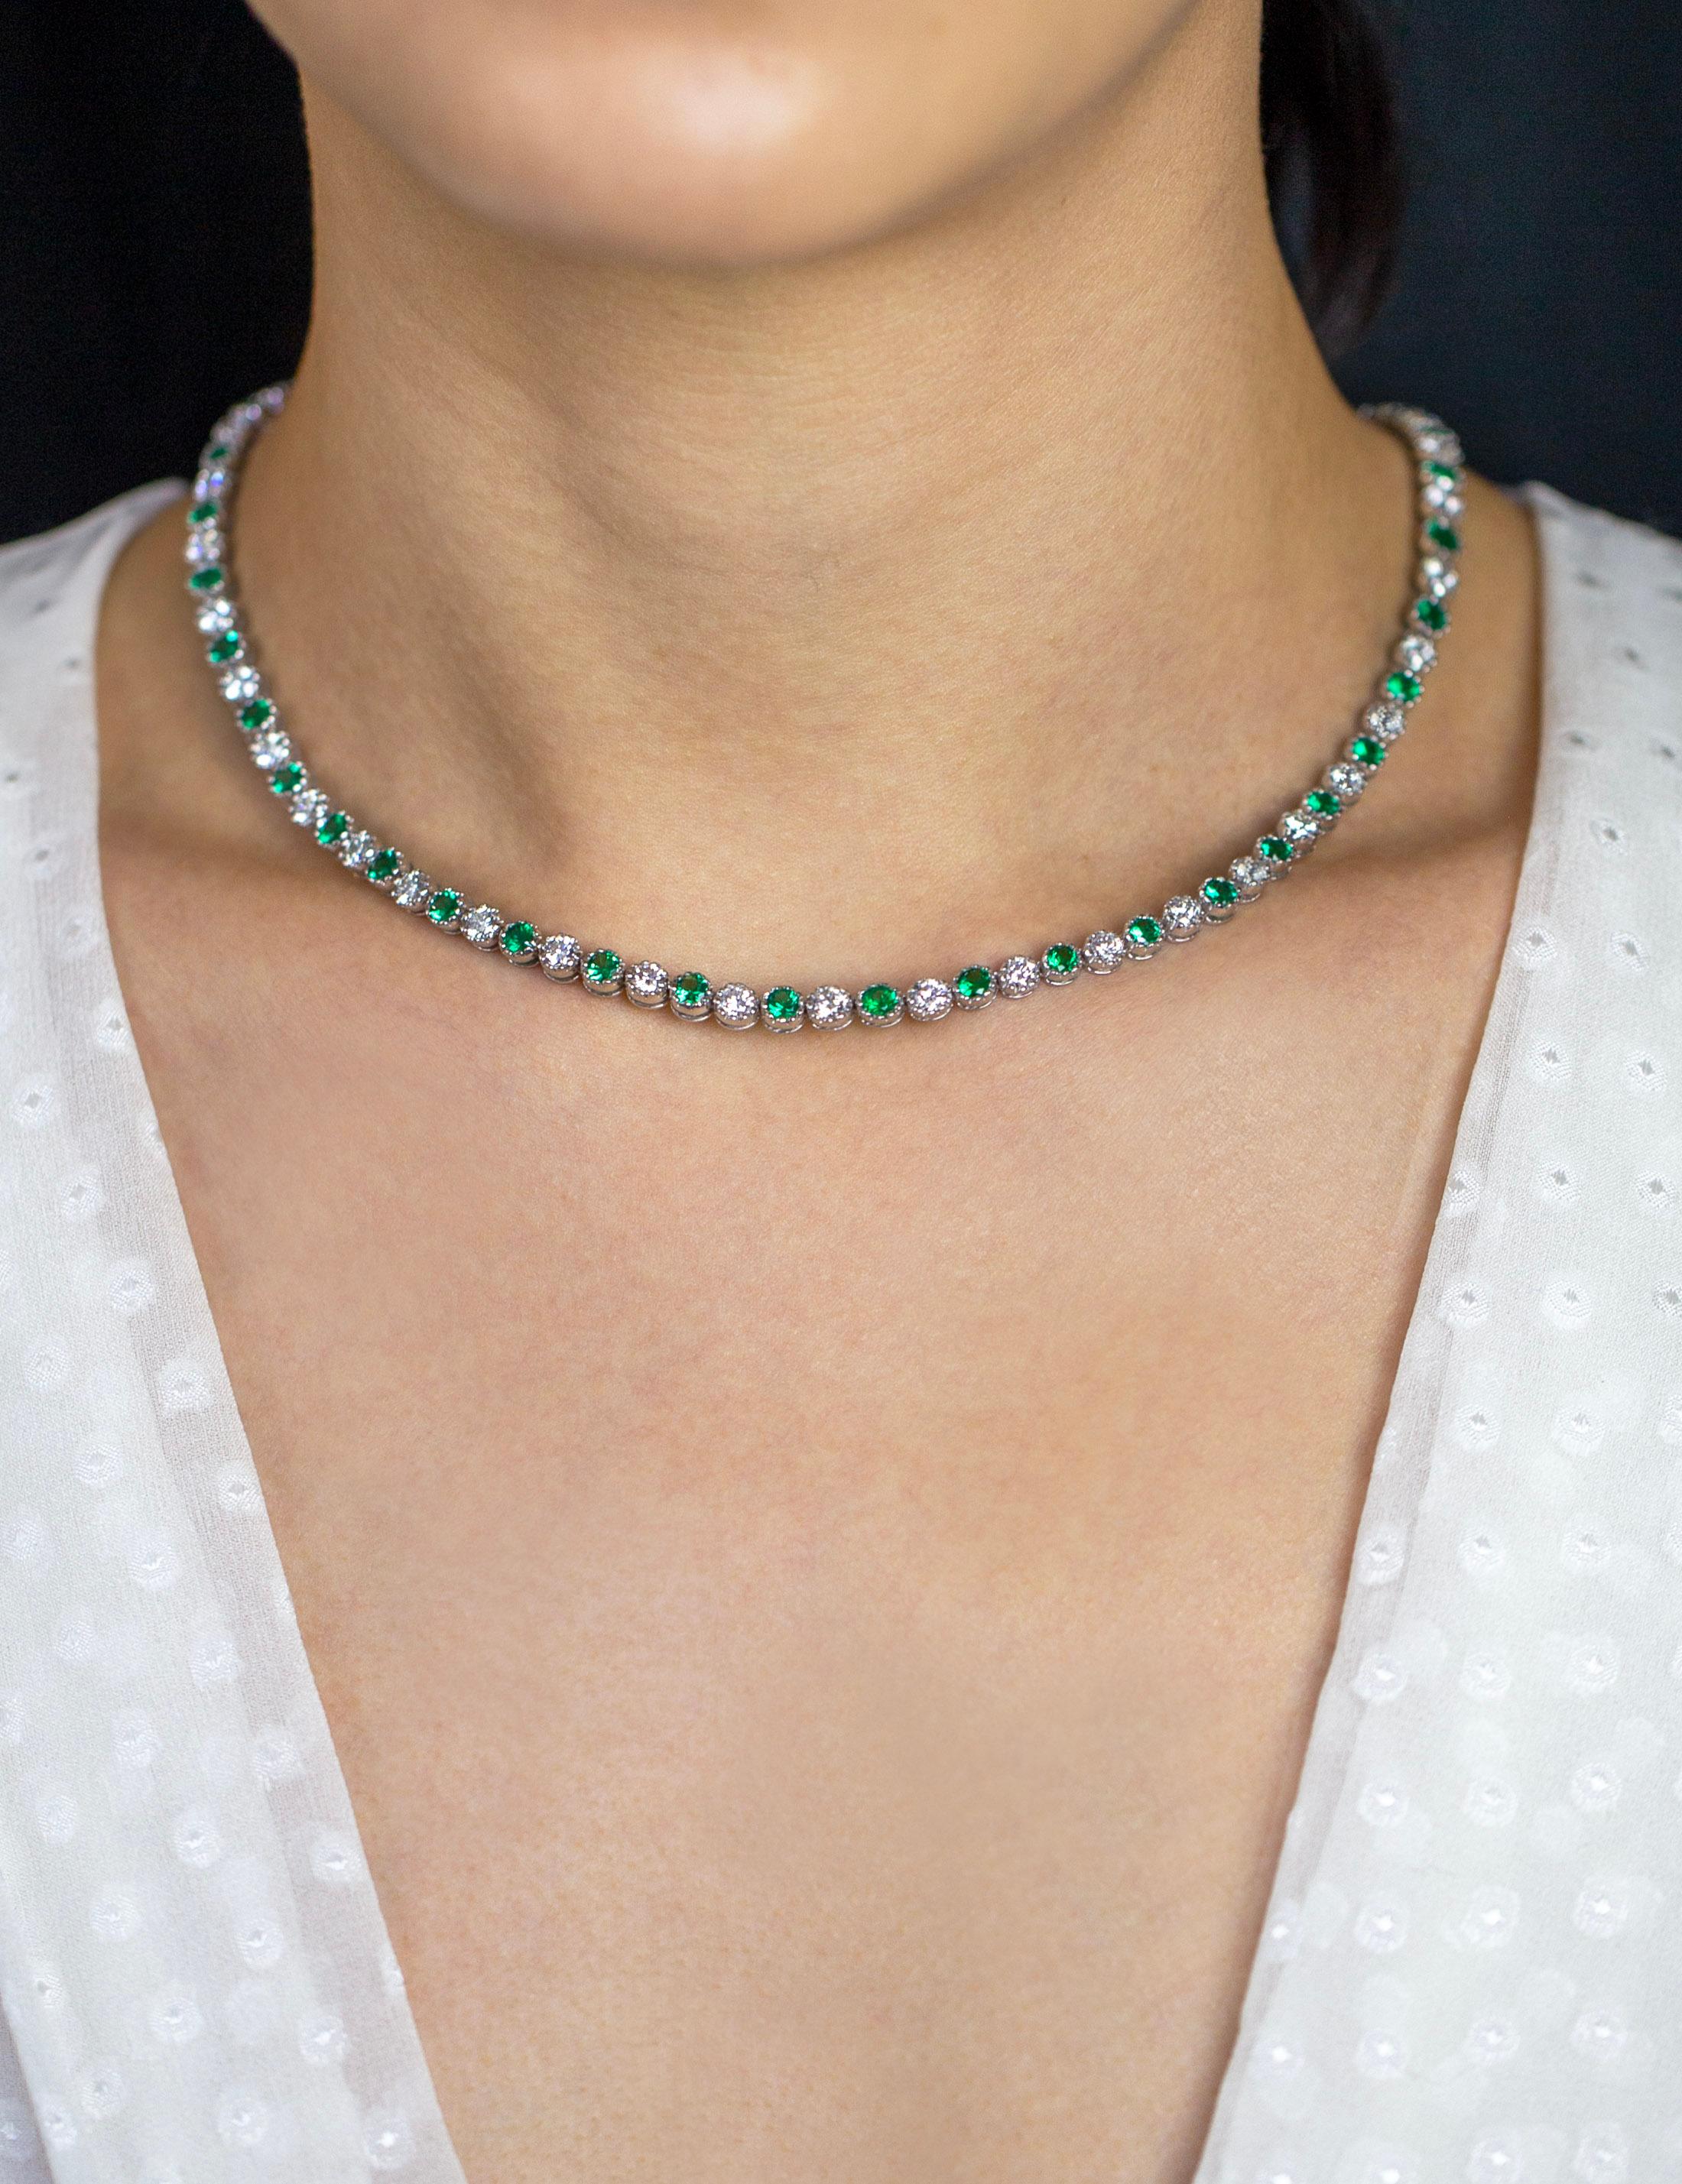 Contemporary Roman Malakov 11.82 Carat Total Round Emerald and Diamond Tennis Necklace For Sale